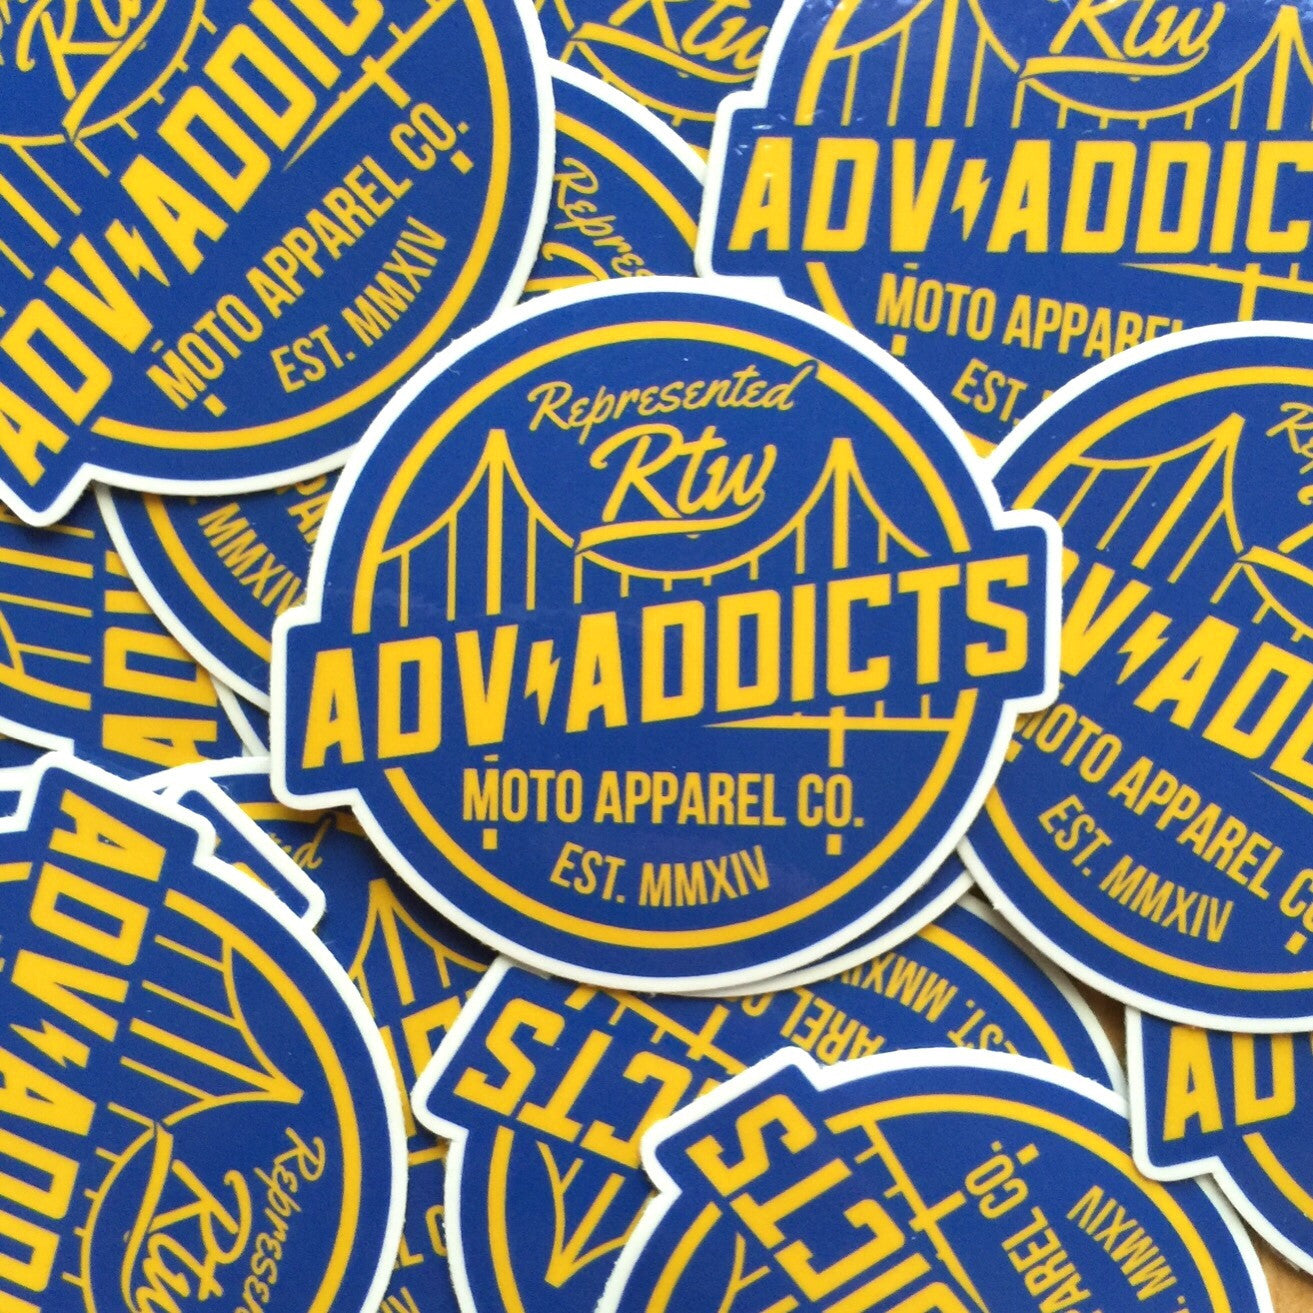 ADV ROUNDEL DECAL PACK